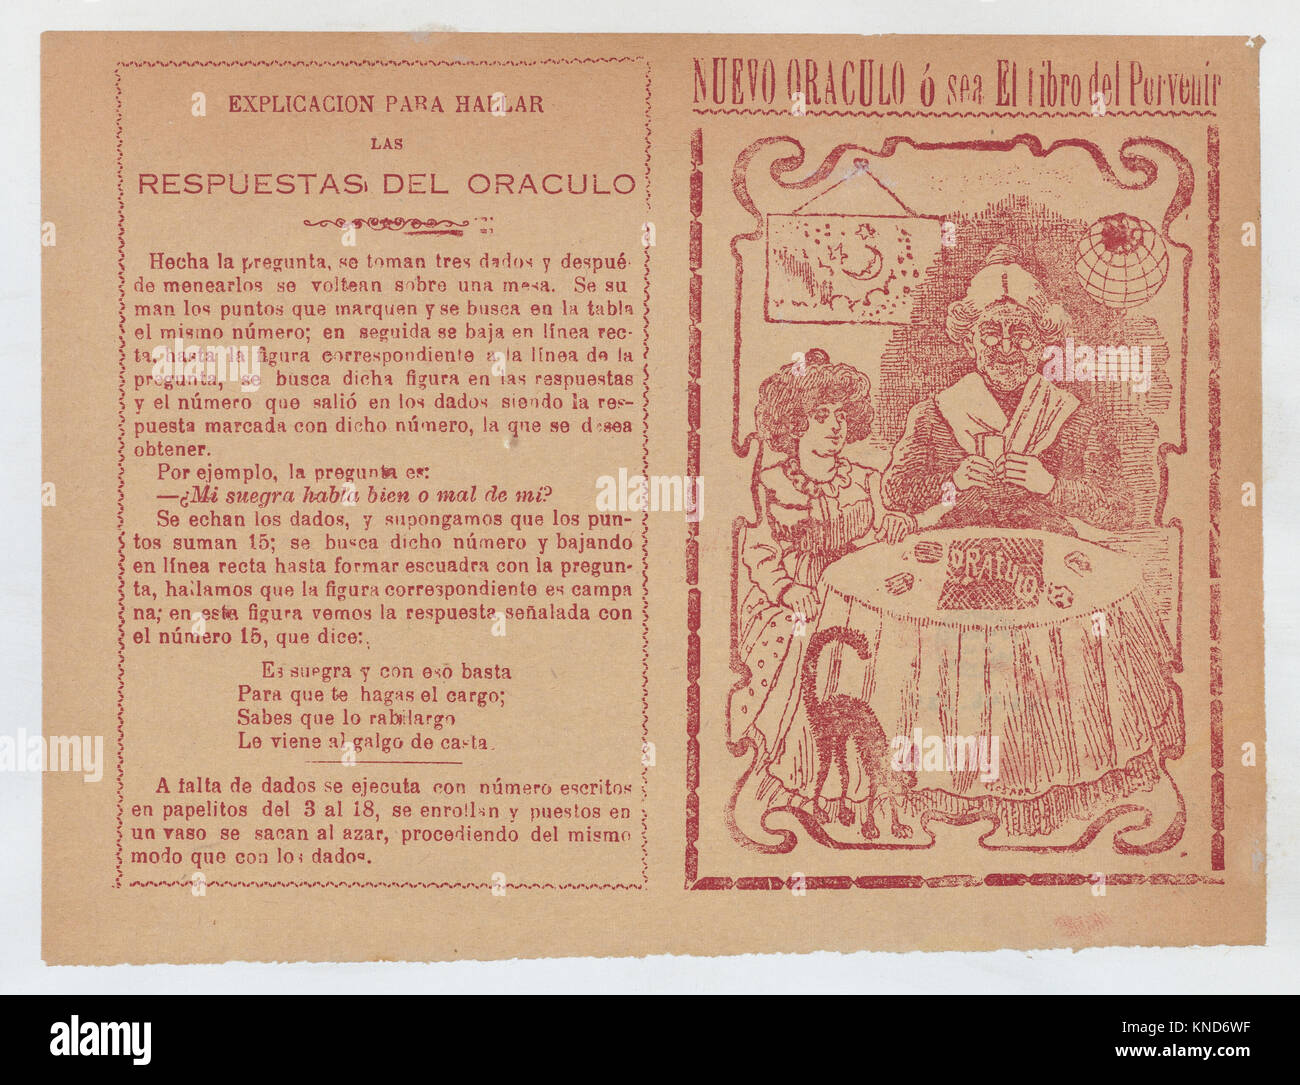 Cover for 'Nuevo Oraculo ó sea El Libro del PorvenC3ADr', an old women seated at a table and reading someone's fortune from cards MET DP868401 738065 Artist: Jos? Guadalupe Posada, Mexican, 1851?1913, Publisher: Antonio Vanegas Arroyo, 1850?1917, Mexican, Cover for 'Nuevo Oraculo ? sea El Libro del Porven?r', an old women seated at a table and reading someone's fortune from cards, ca. 1880?1910, Photo-relief and letterpress in red ink on tan paper, Sheet: 5 13/16 ? 7 7/8 in. (14.8 ? 20 cm). The Metropolitan Museum of Art, New York. The Elisha Whittelsey Collection, The Elisha Whittelsey Fund,  Stock Photo